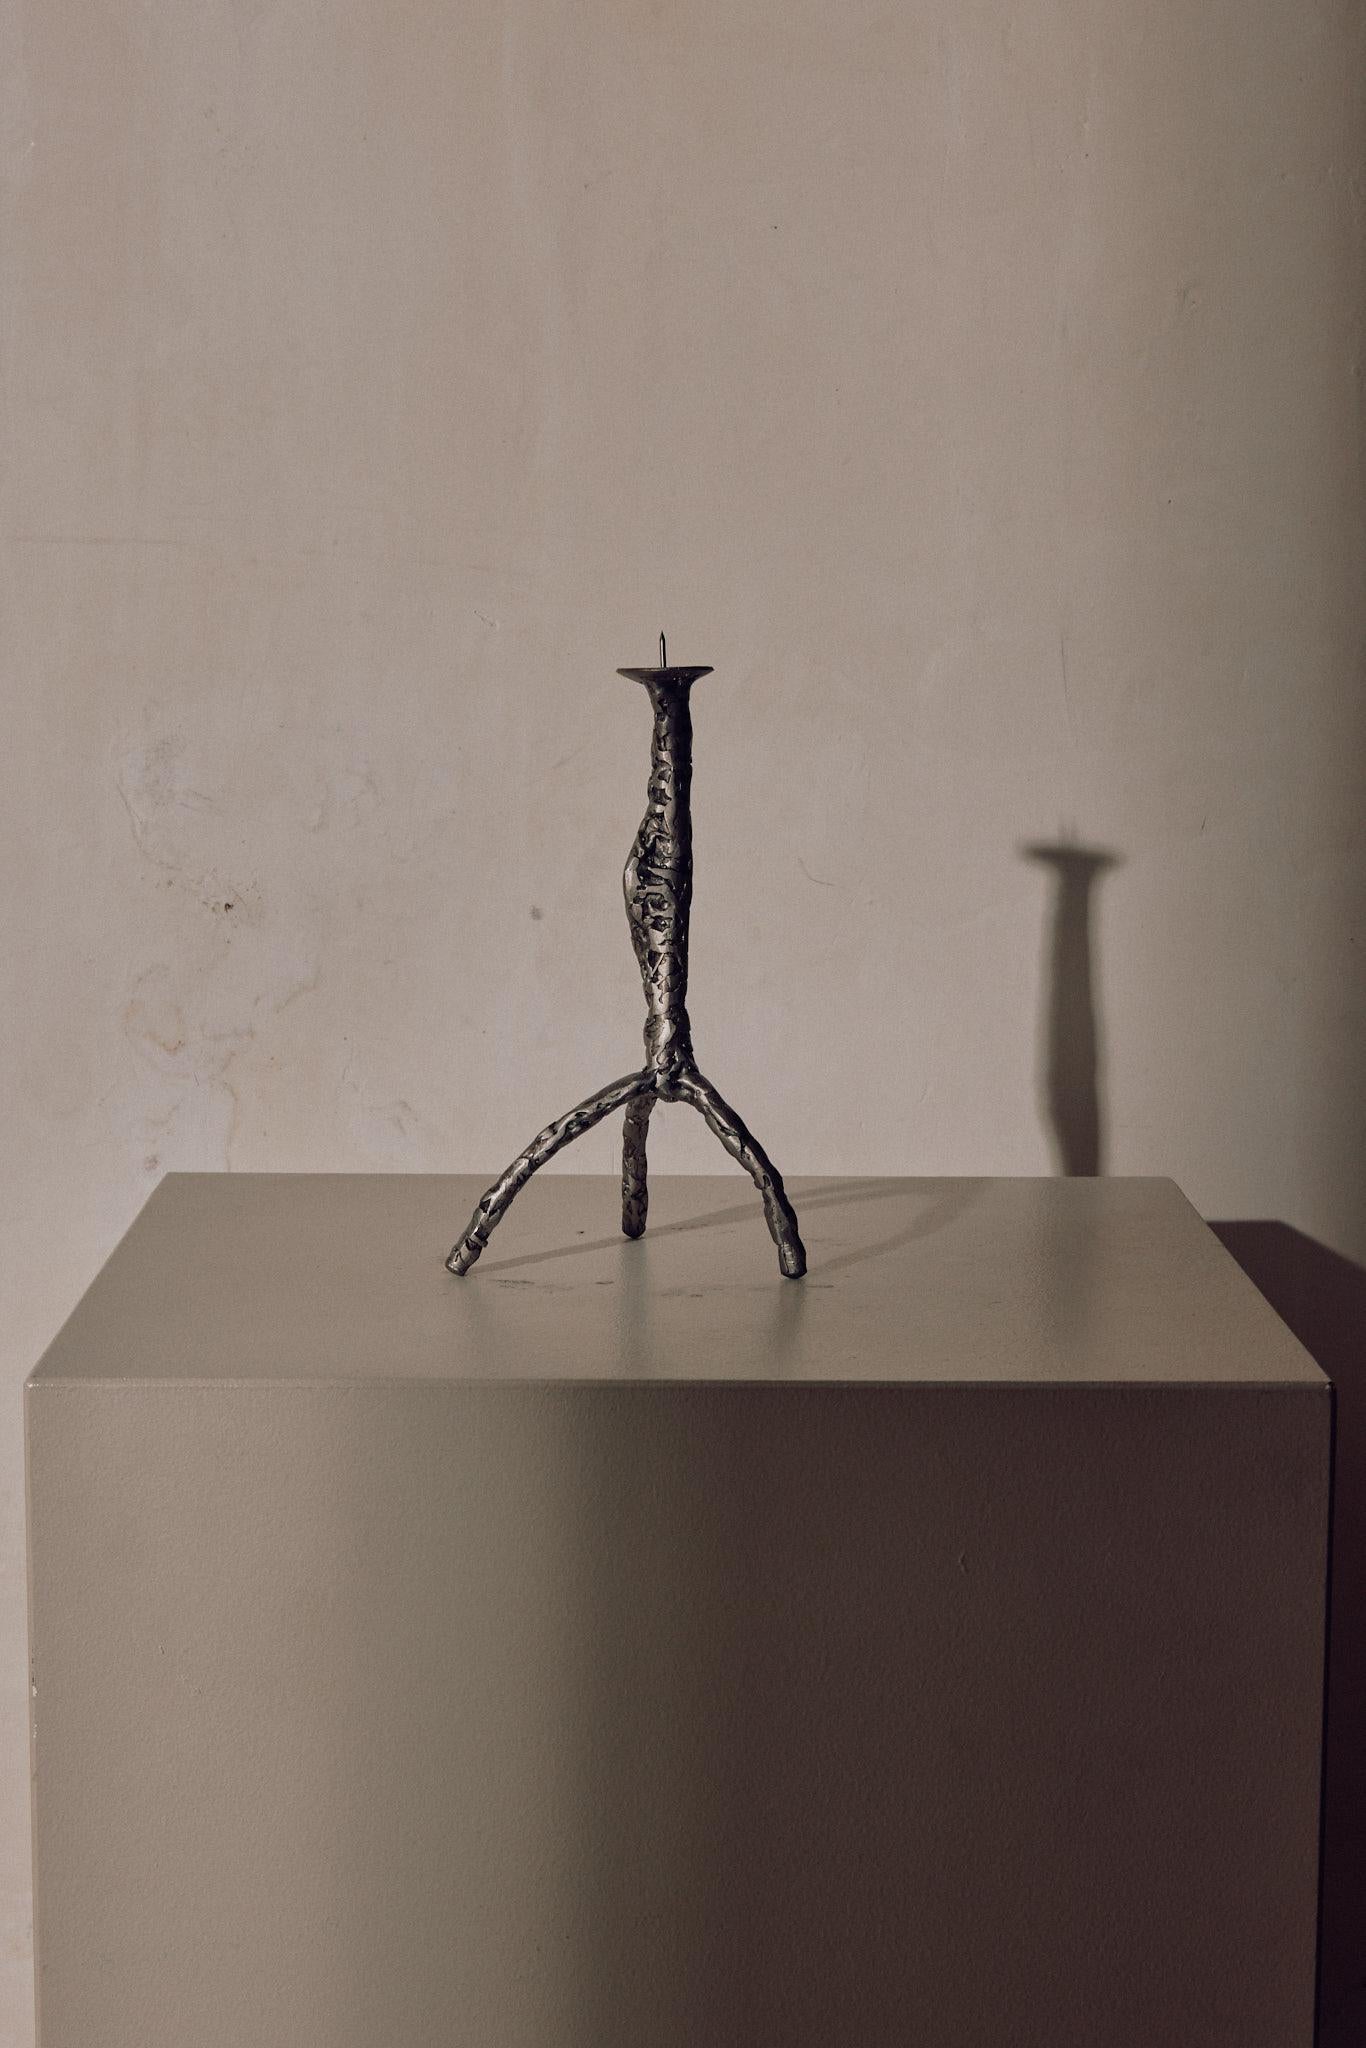 Small candle stick 2 by Michael Gittings
Dimensions: D 25 x W 25 x H 25 cm
Materials: stainless steel.


Michael Gittings
Michael Gittings imagines with his hands. Since establishing his studio in 2016, the Melbourne based designer and